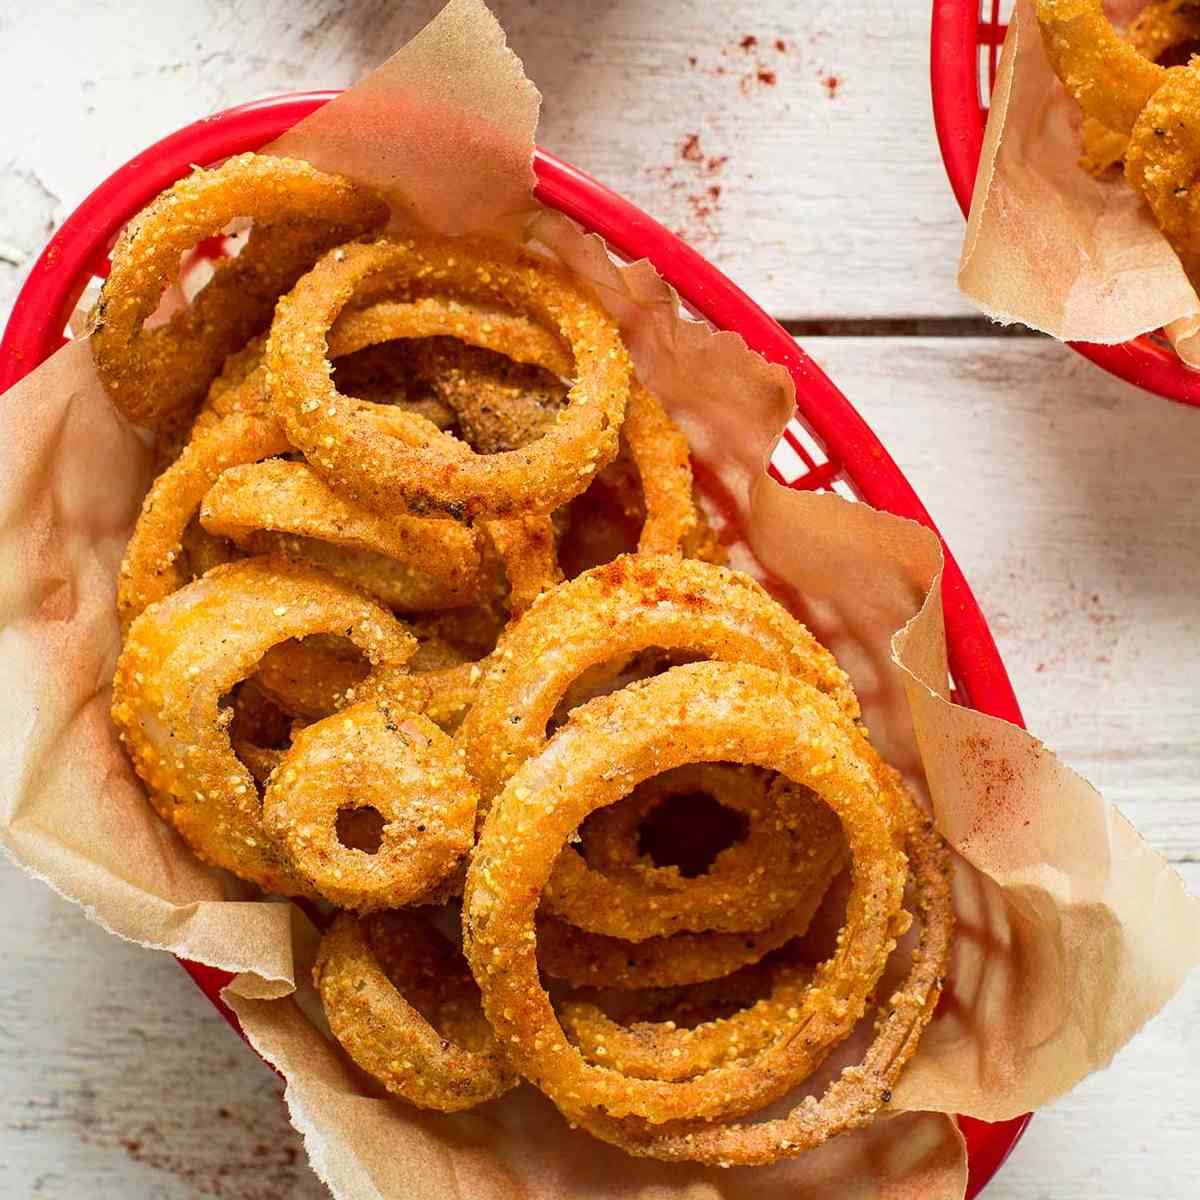 Onion rings in a red basket lined with paper, a sauce on the side.